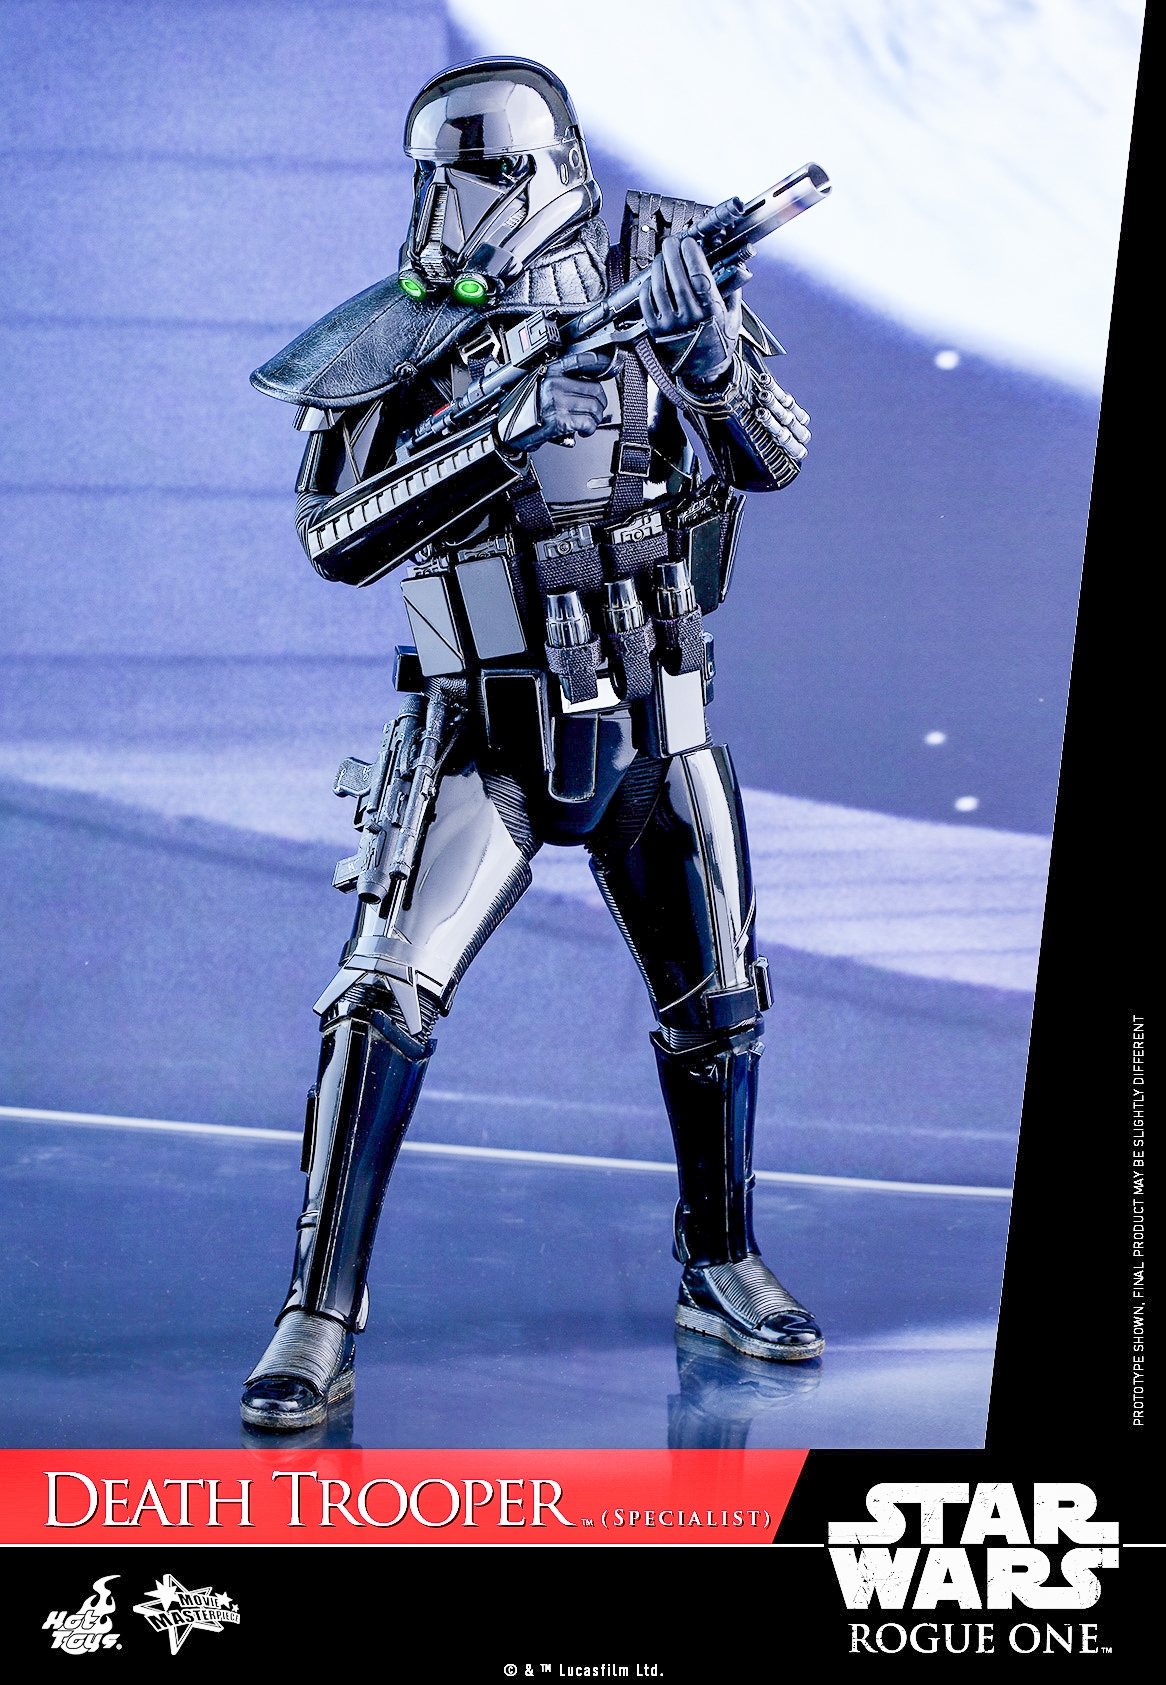 Hot-Toys-MMS385-Rogue-One-Death-Trooper-Specialist-002.jpg